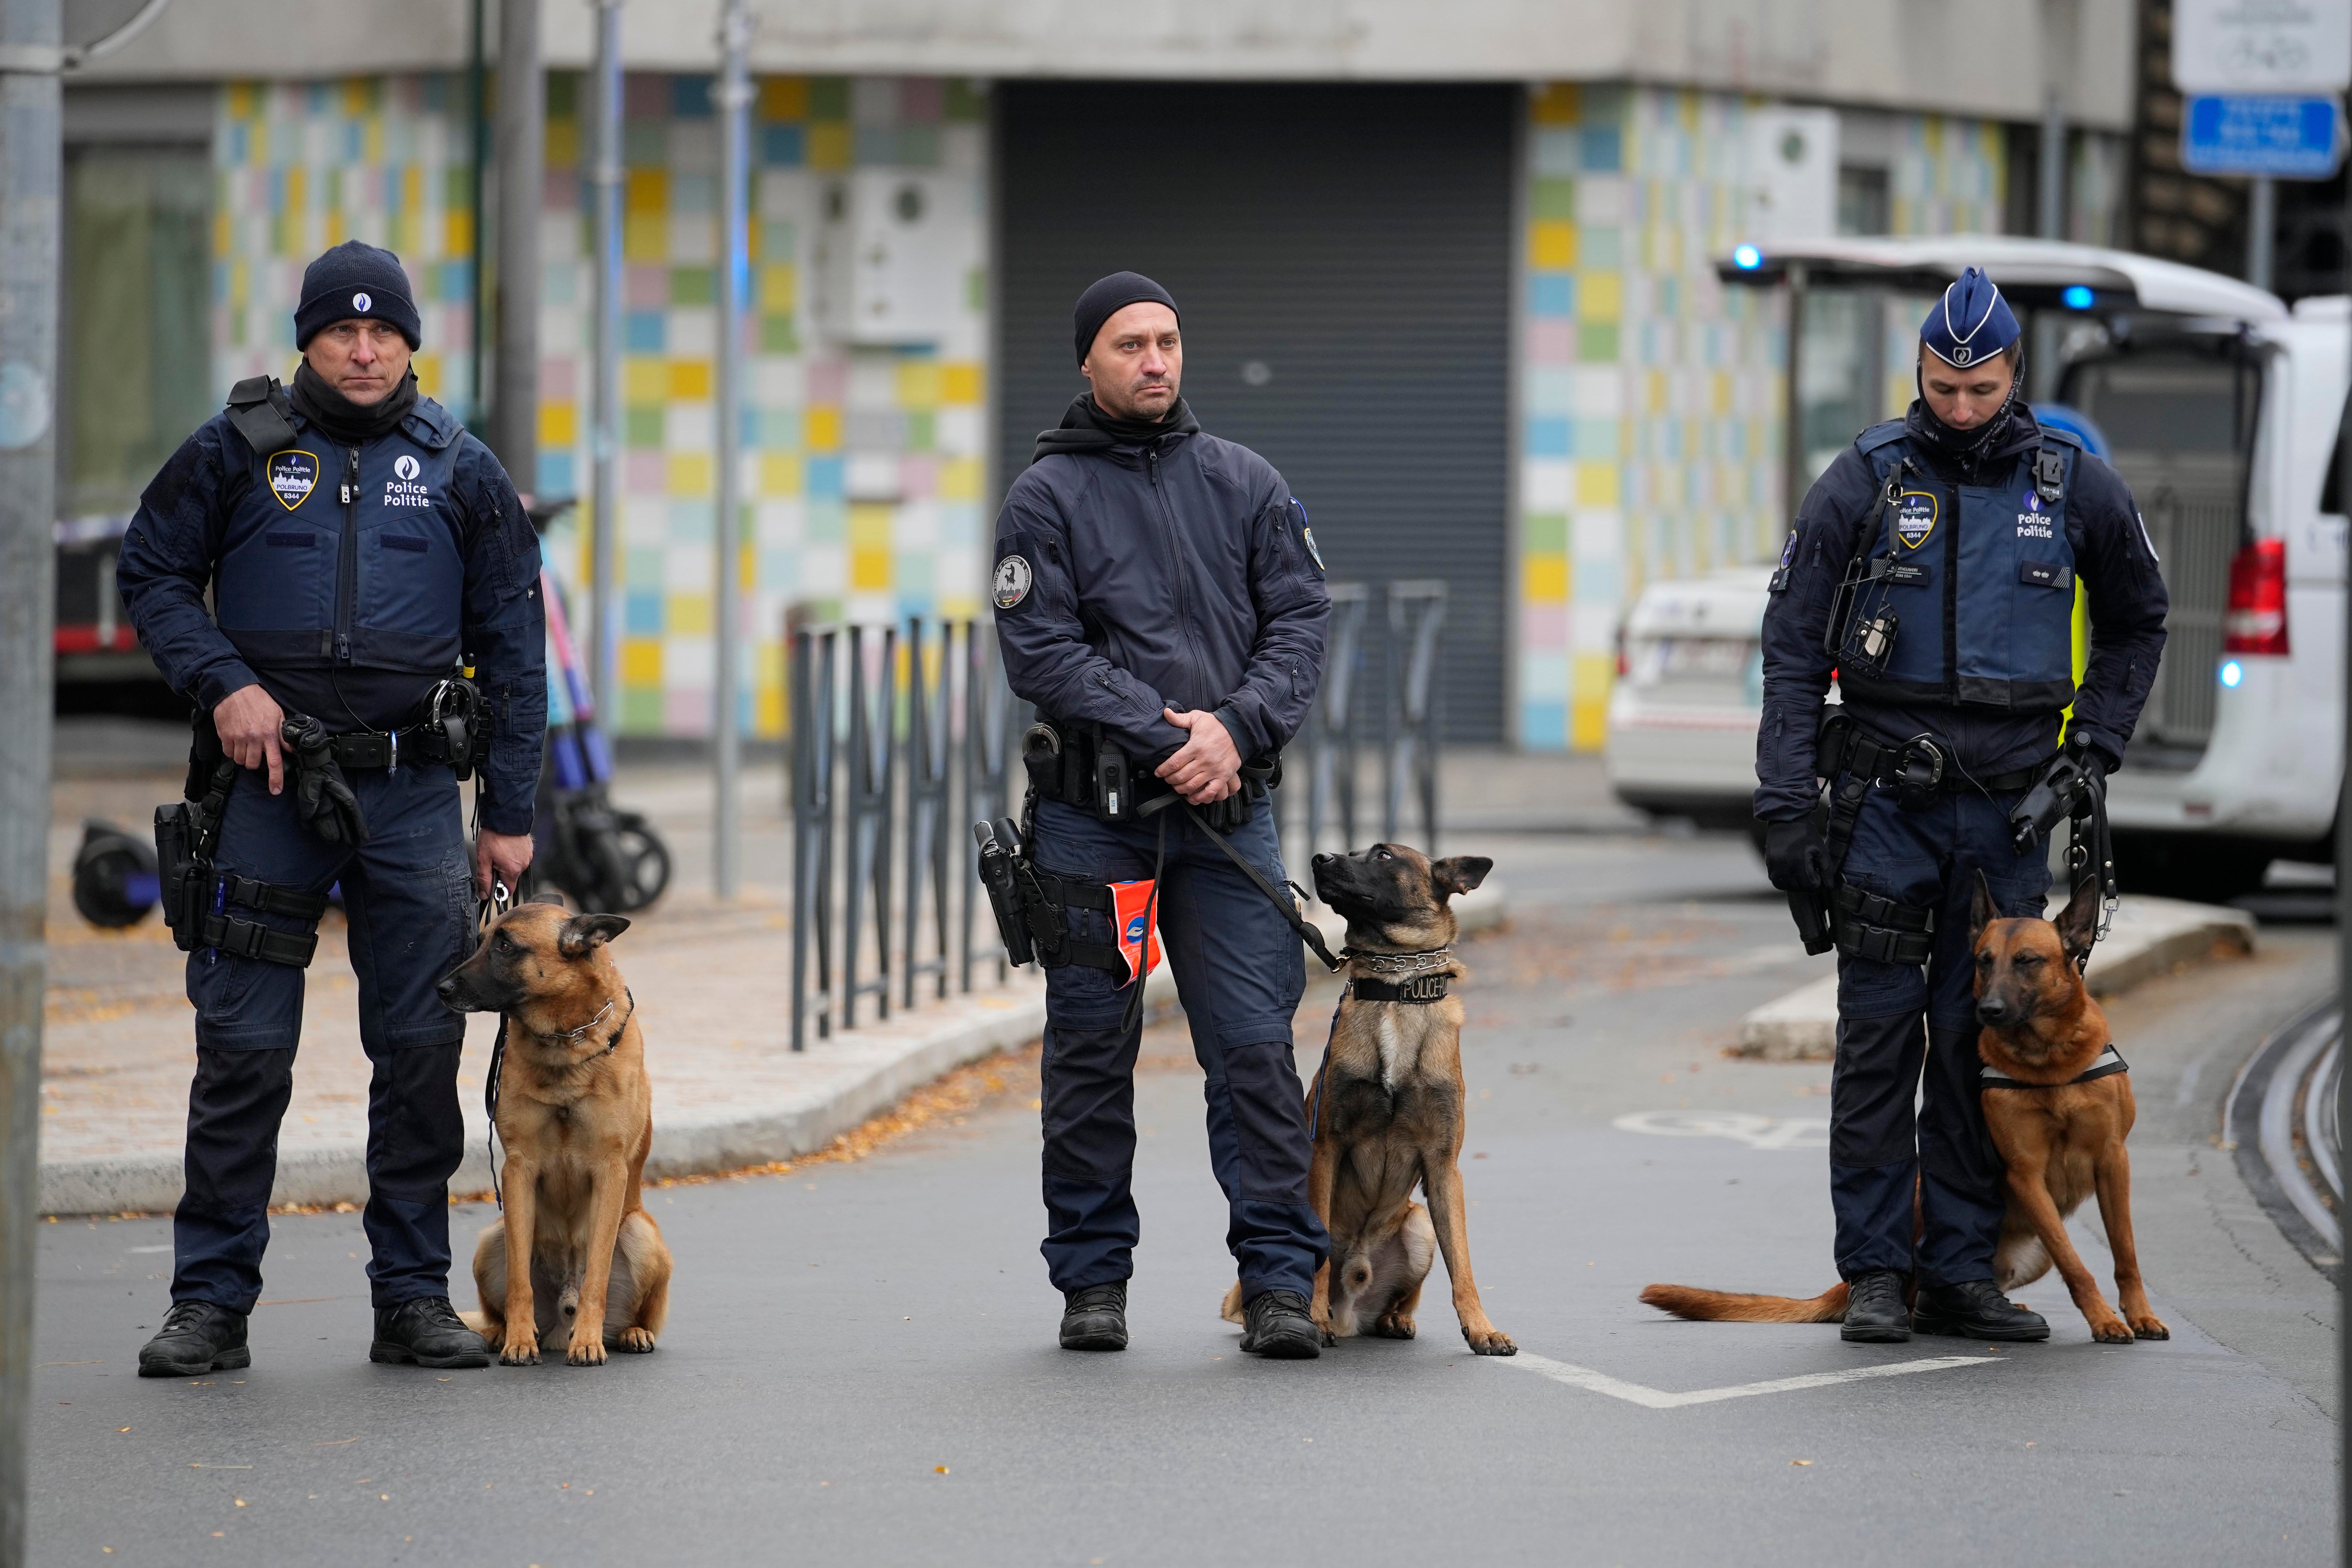 The suspect was shot dead after a manhunt in central Brussels